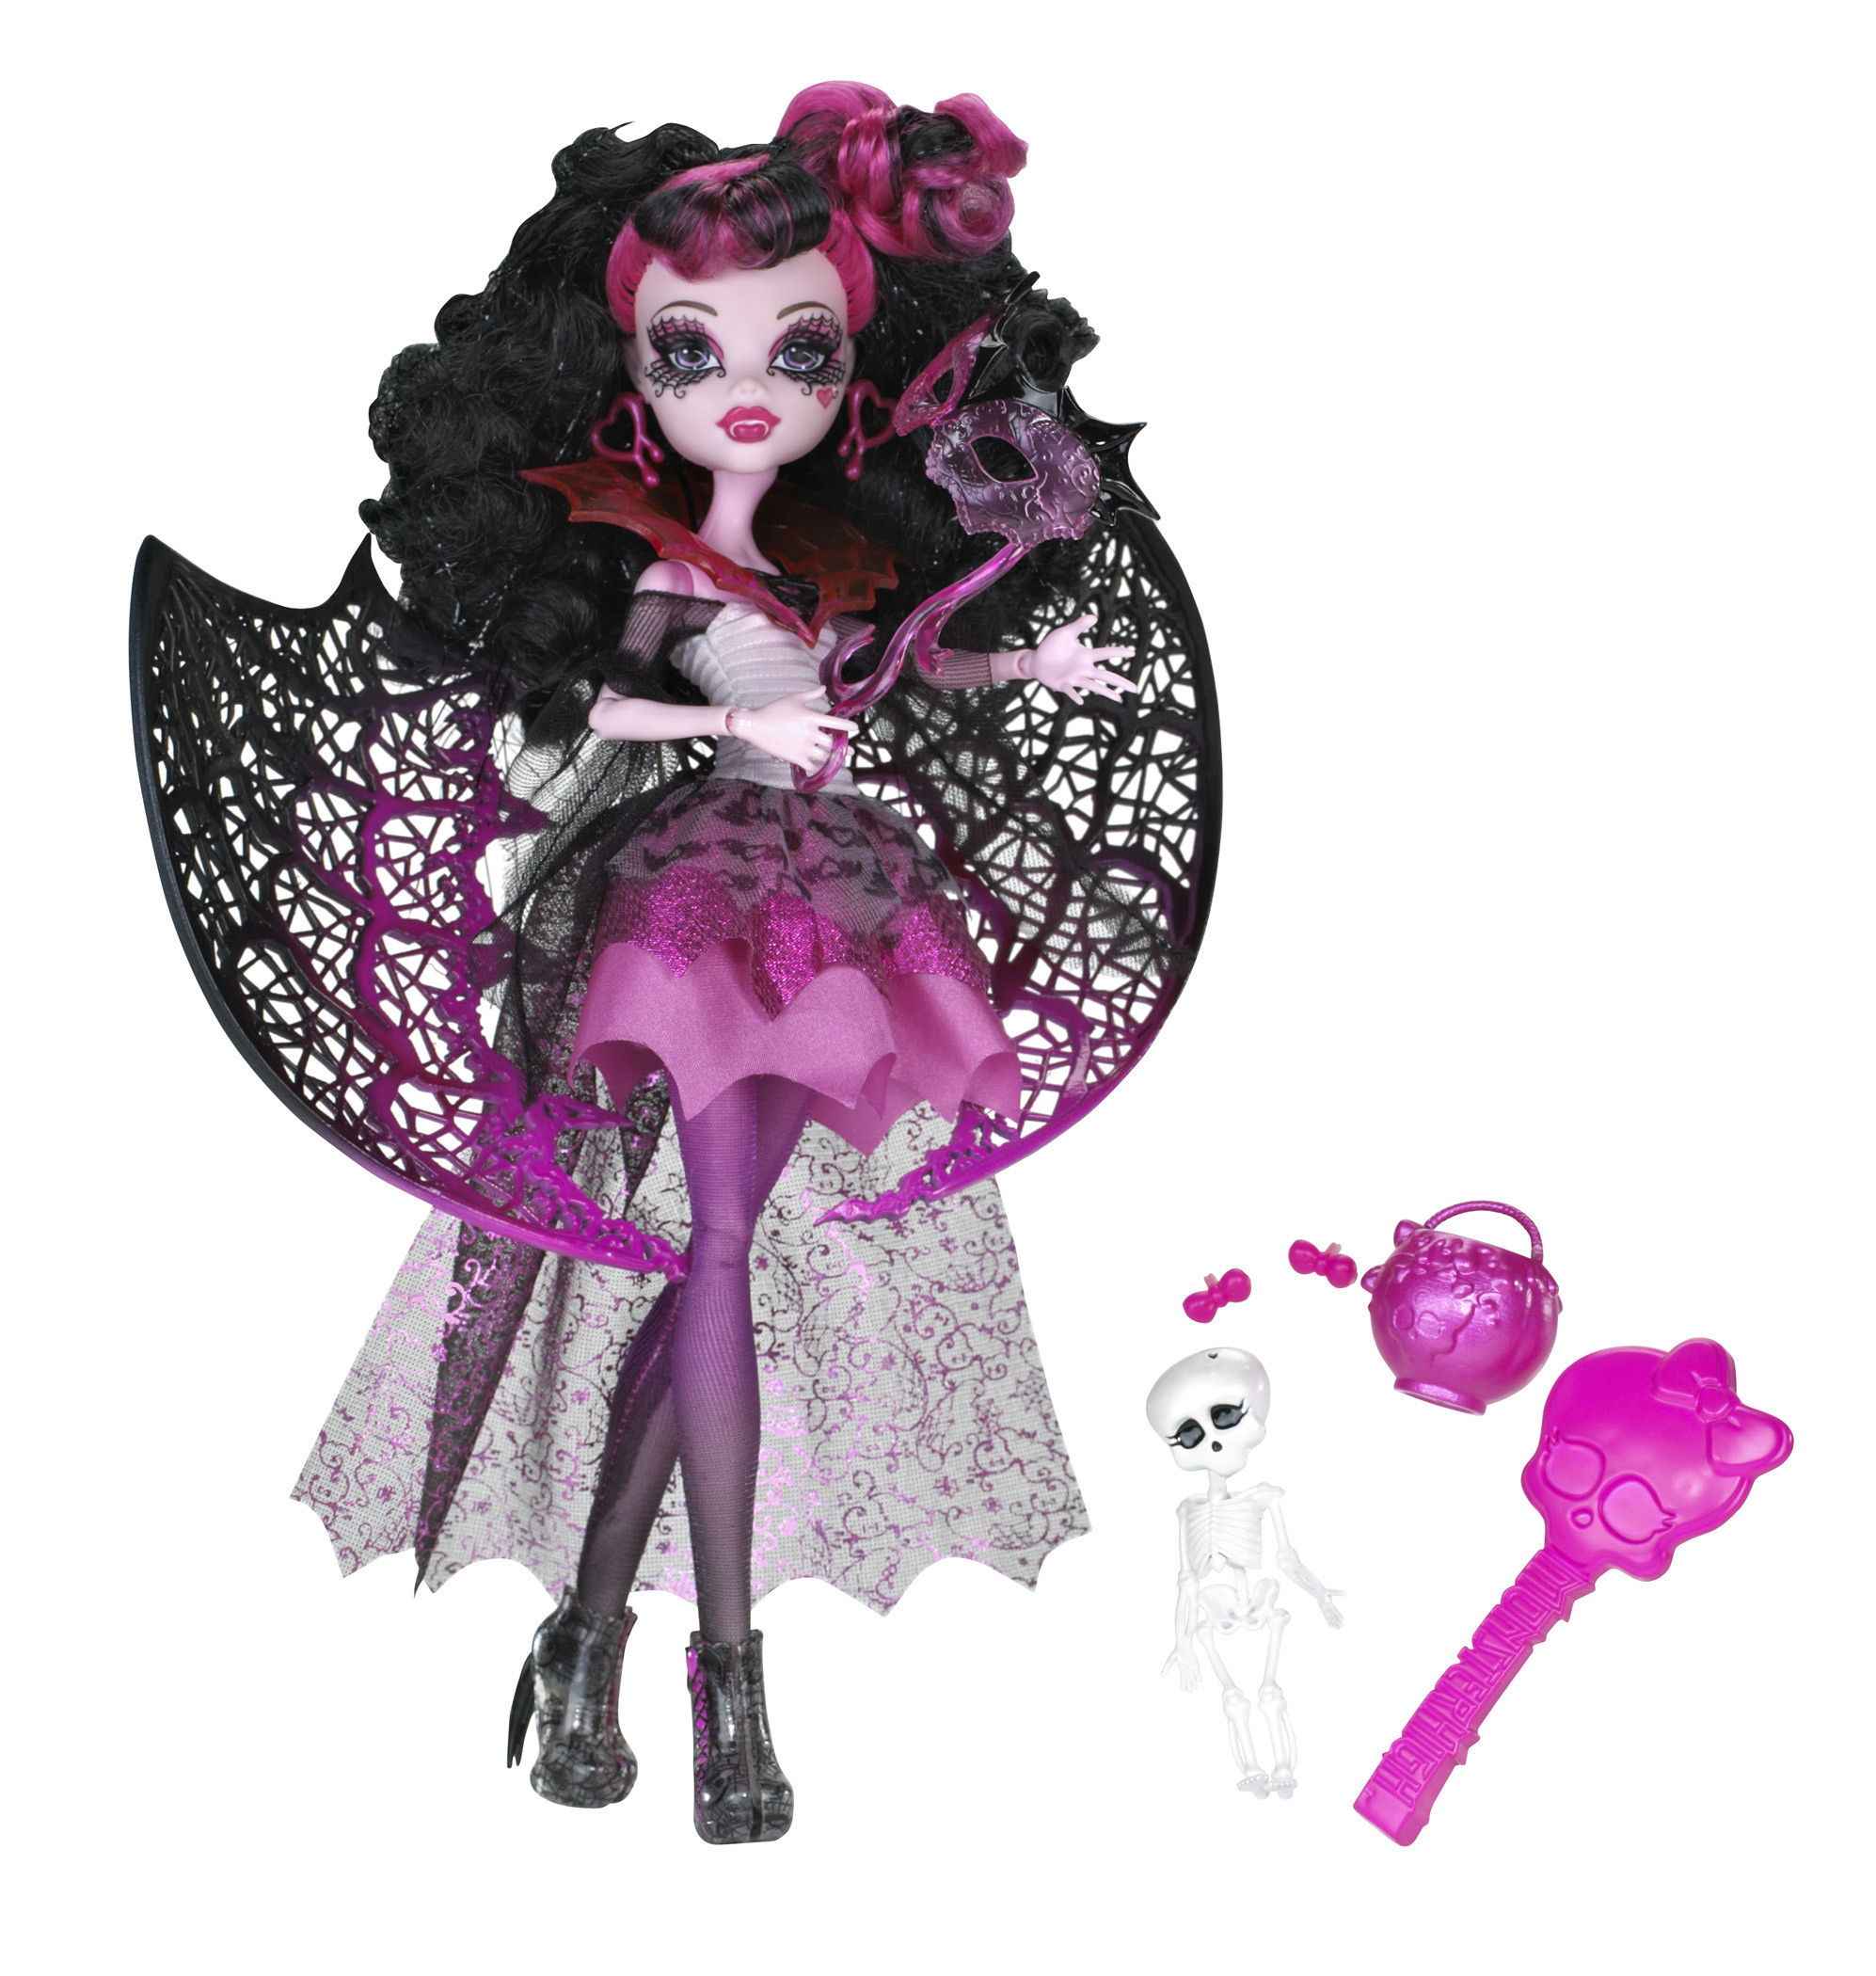 1994x2100 monster high is awesome images mh HD wallpaper and background photos